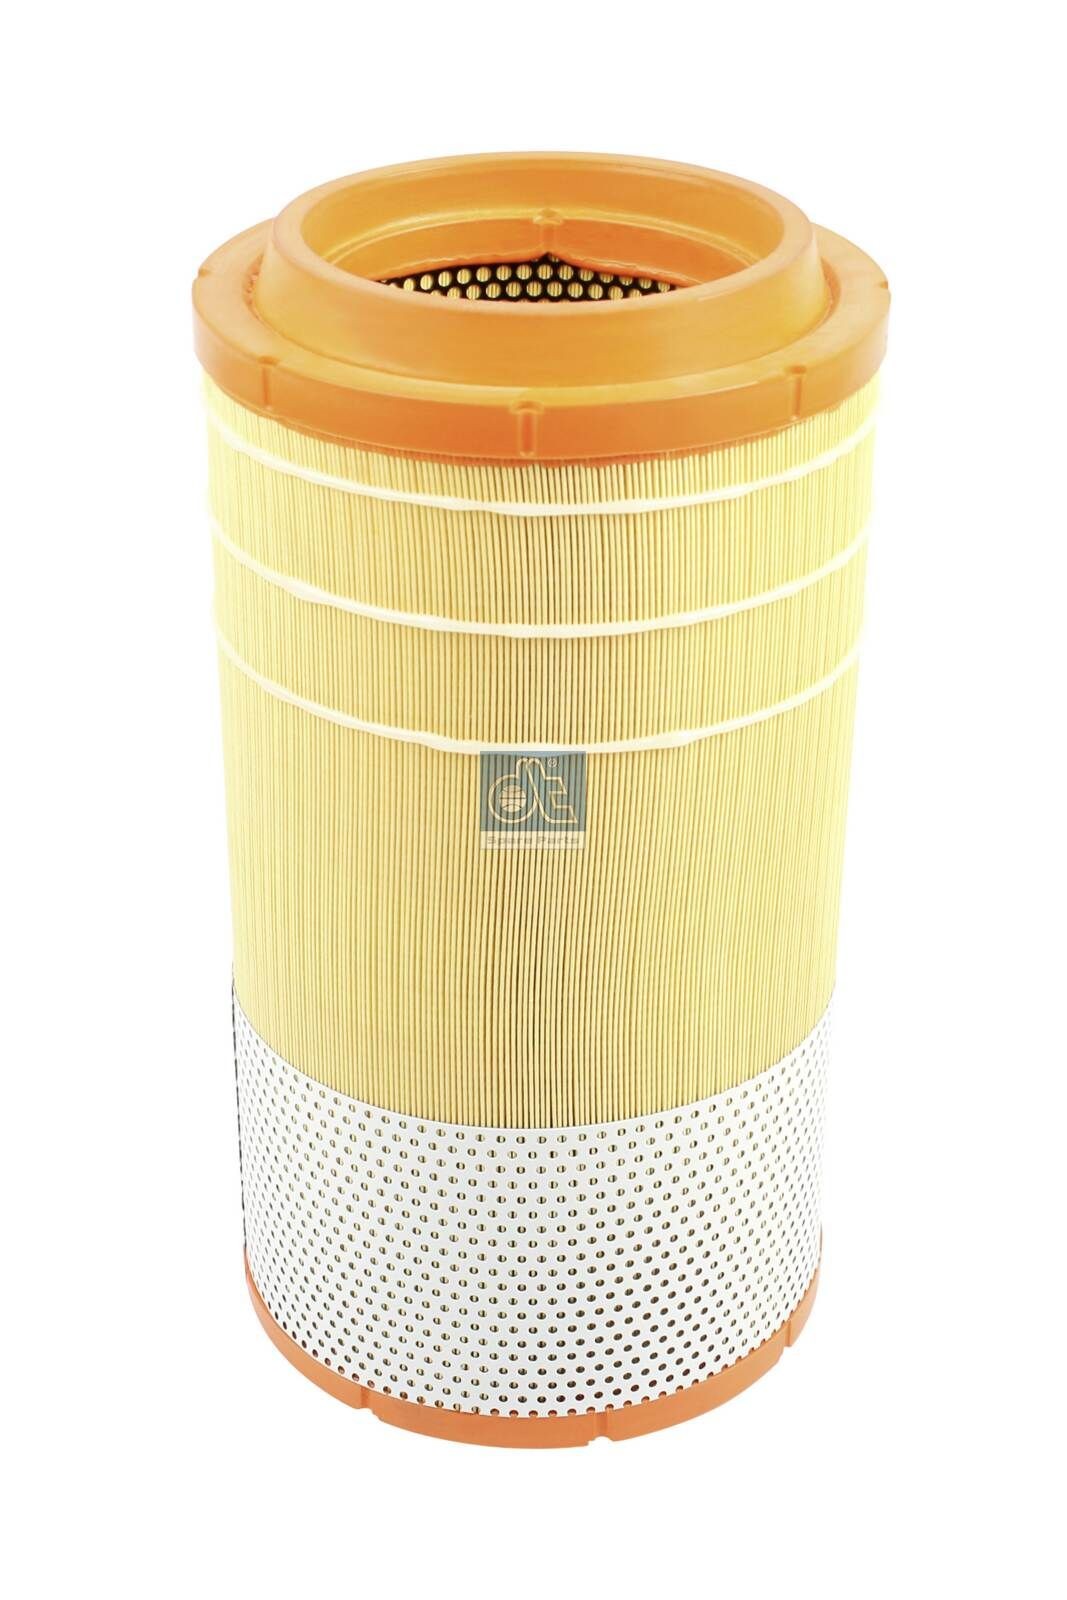 C 26 980 DT Spare Parts 3.18524 Air filter 83.08405.0001